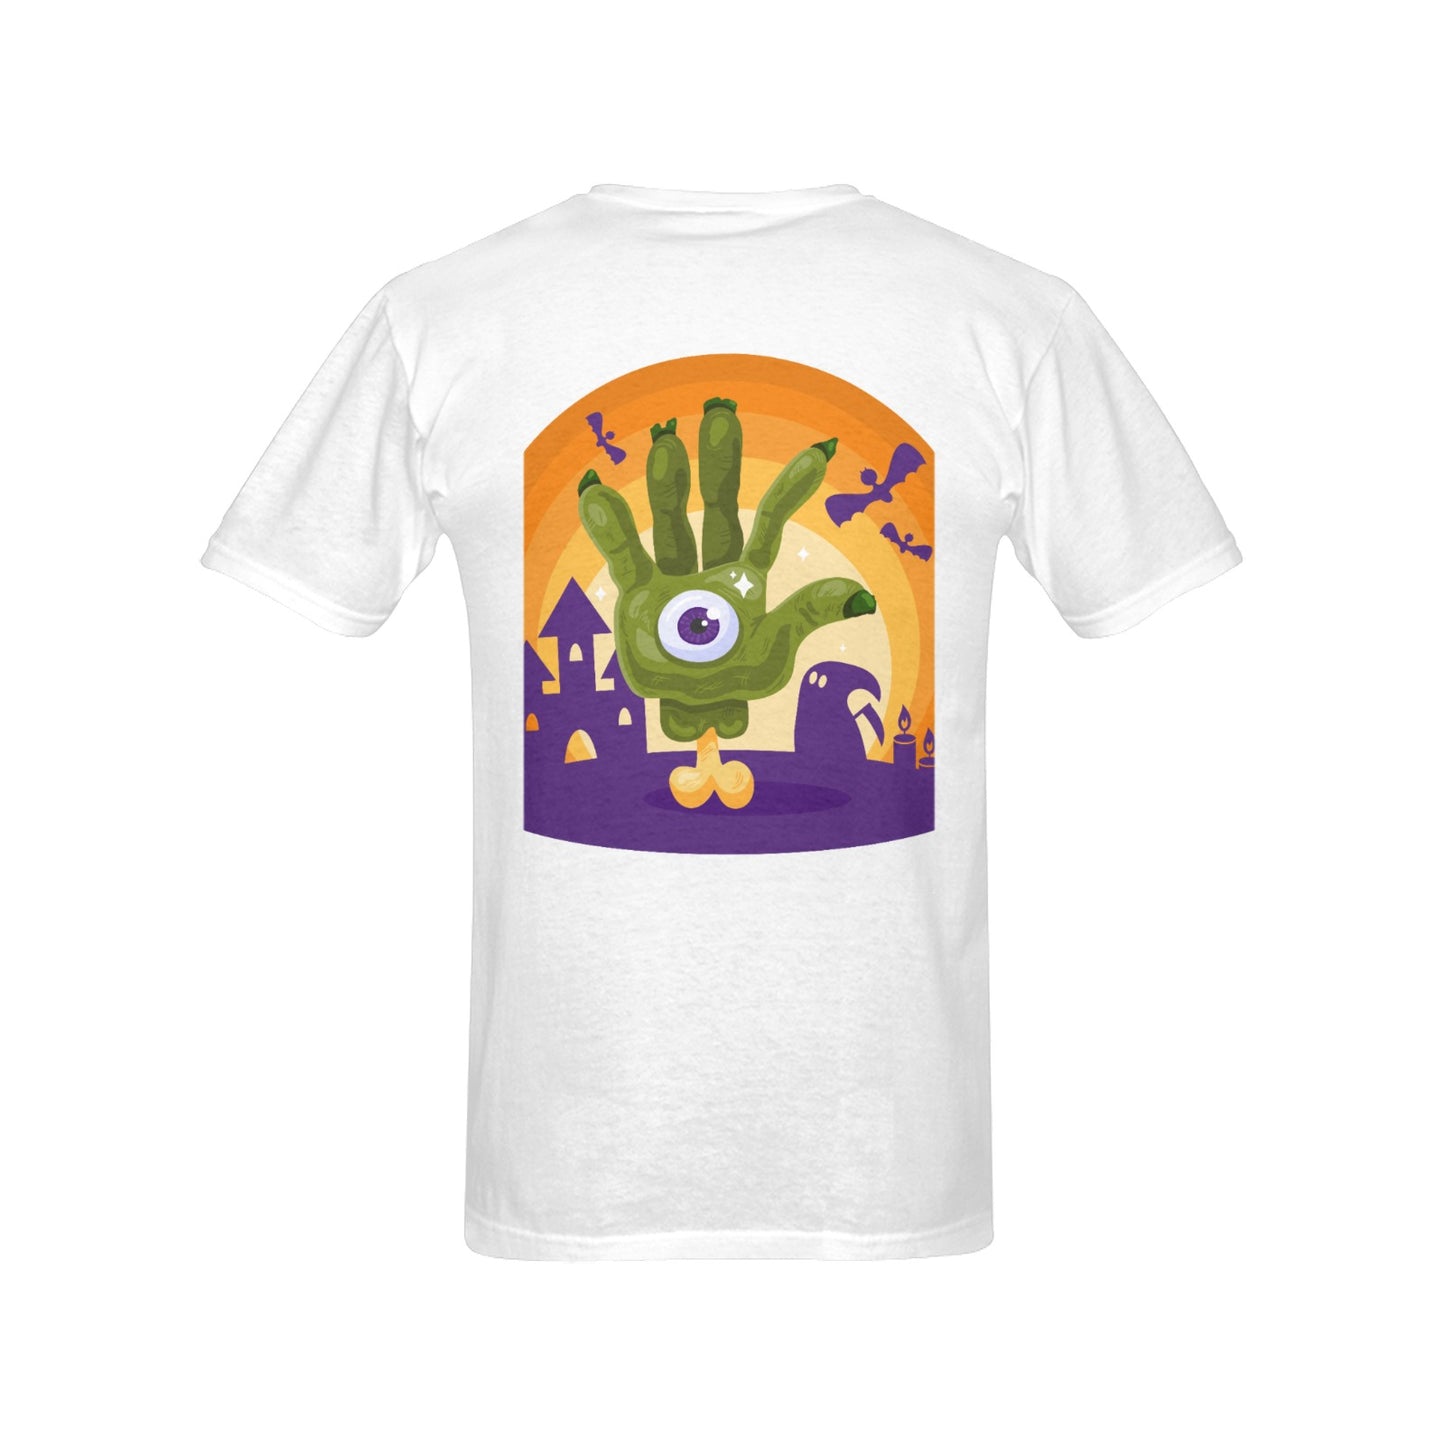 Have You Seen My Hand Tee